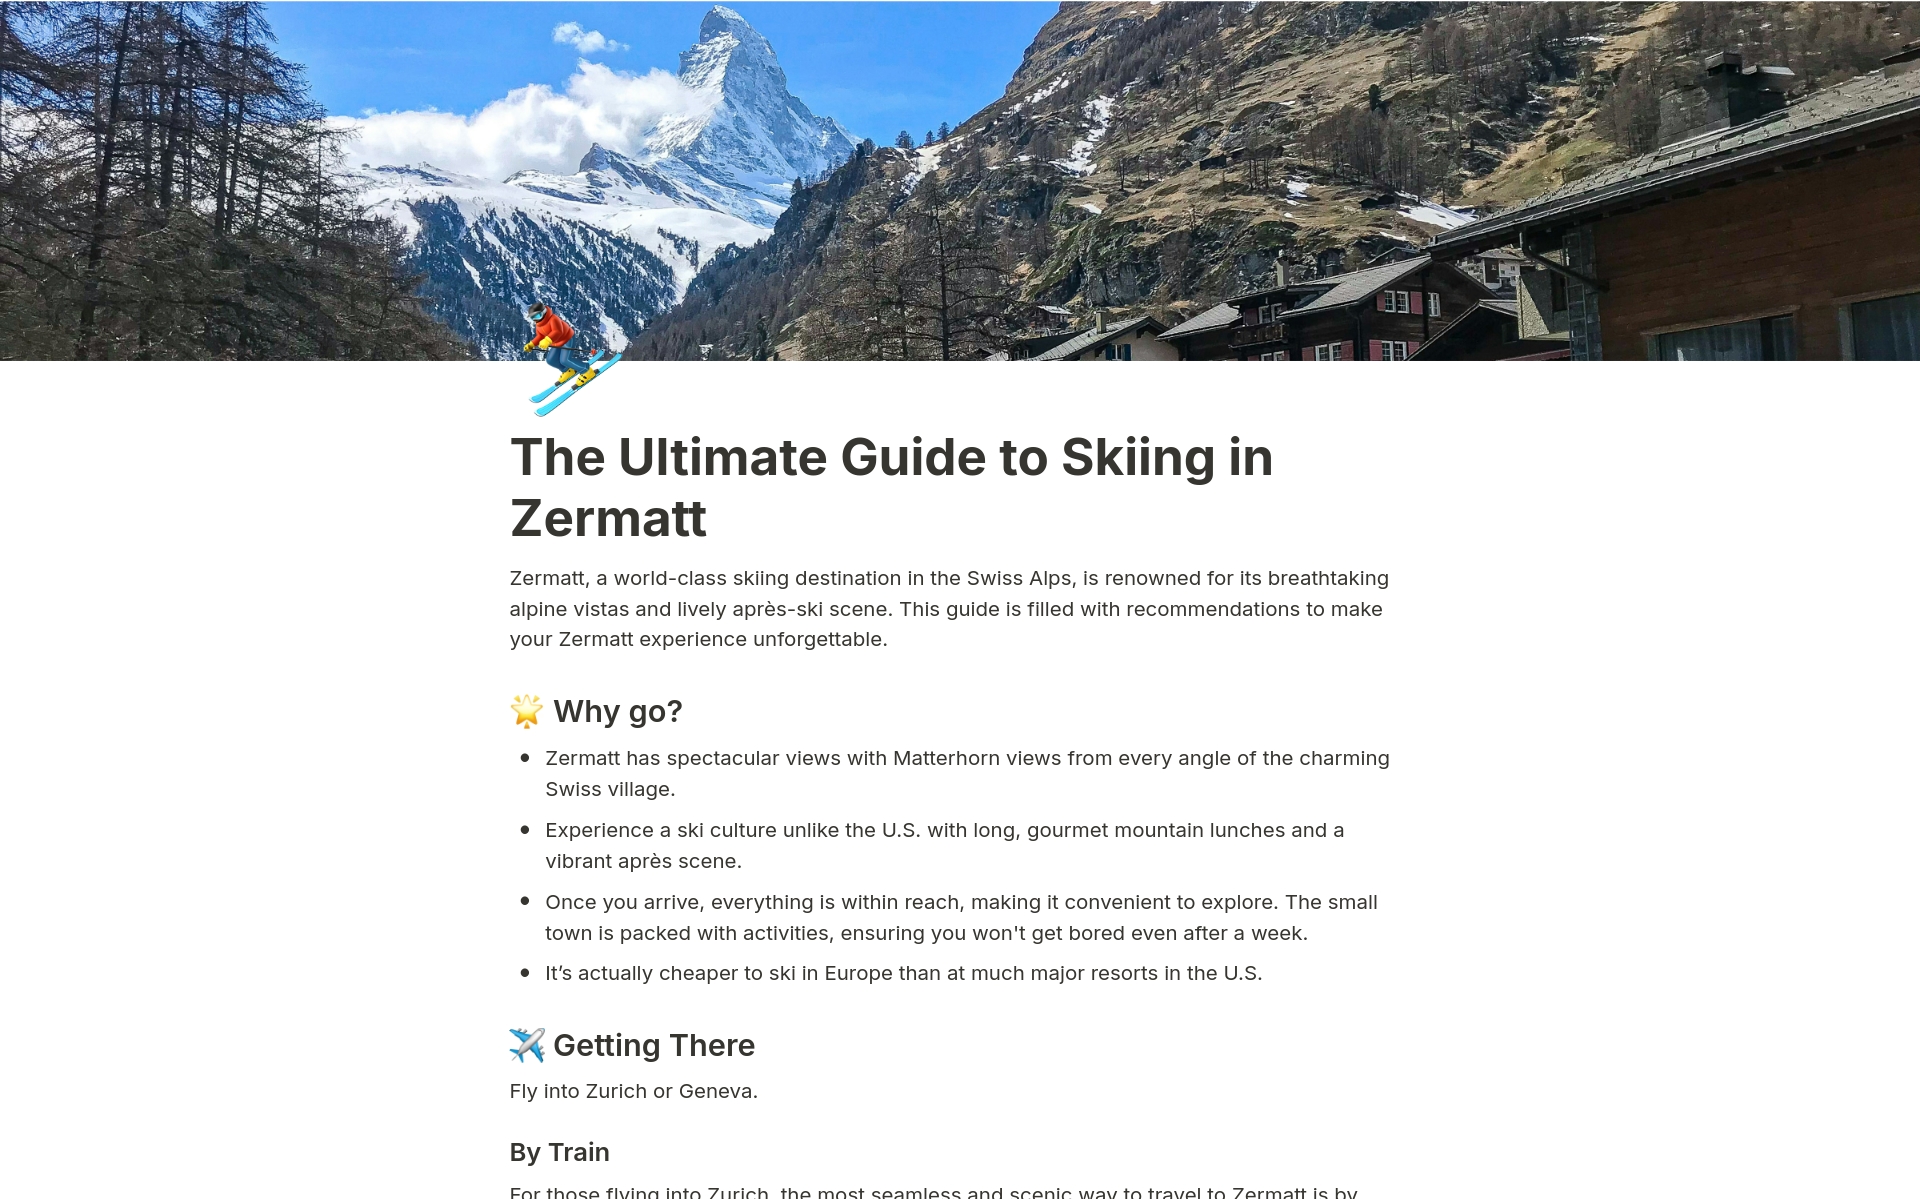 Our Ultimate Guide to Skiing in Zermatt features the best recommendations to jumpstart your trip planning.